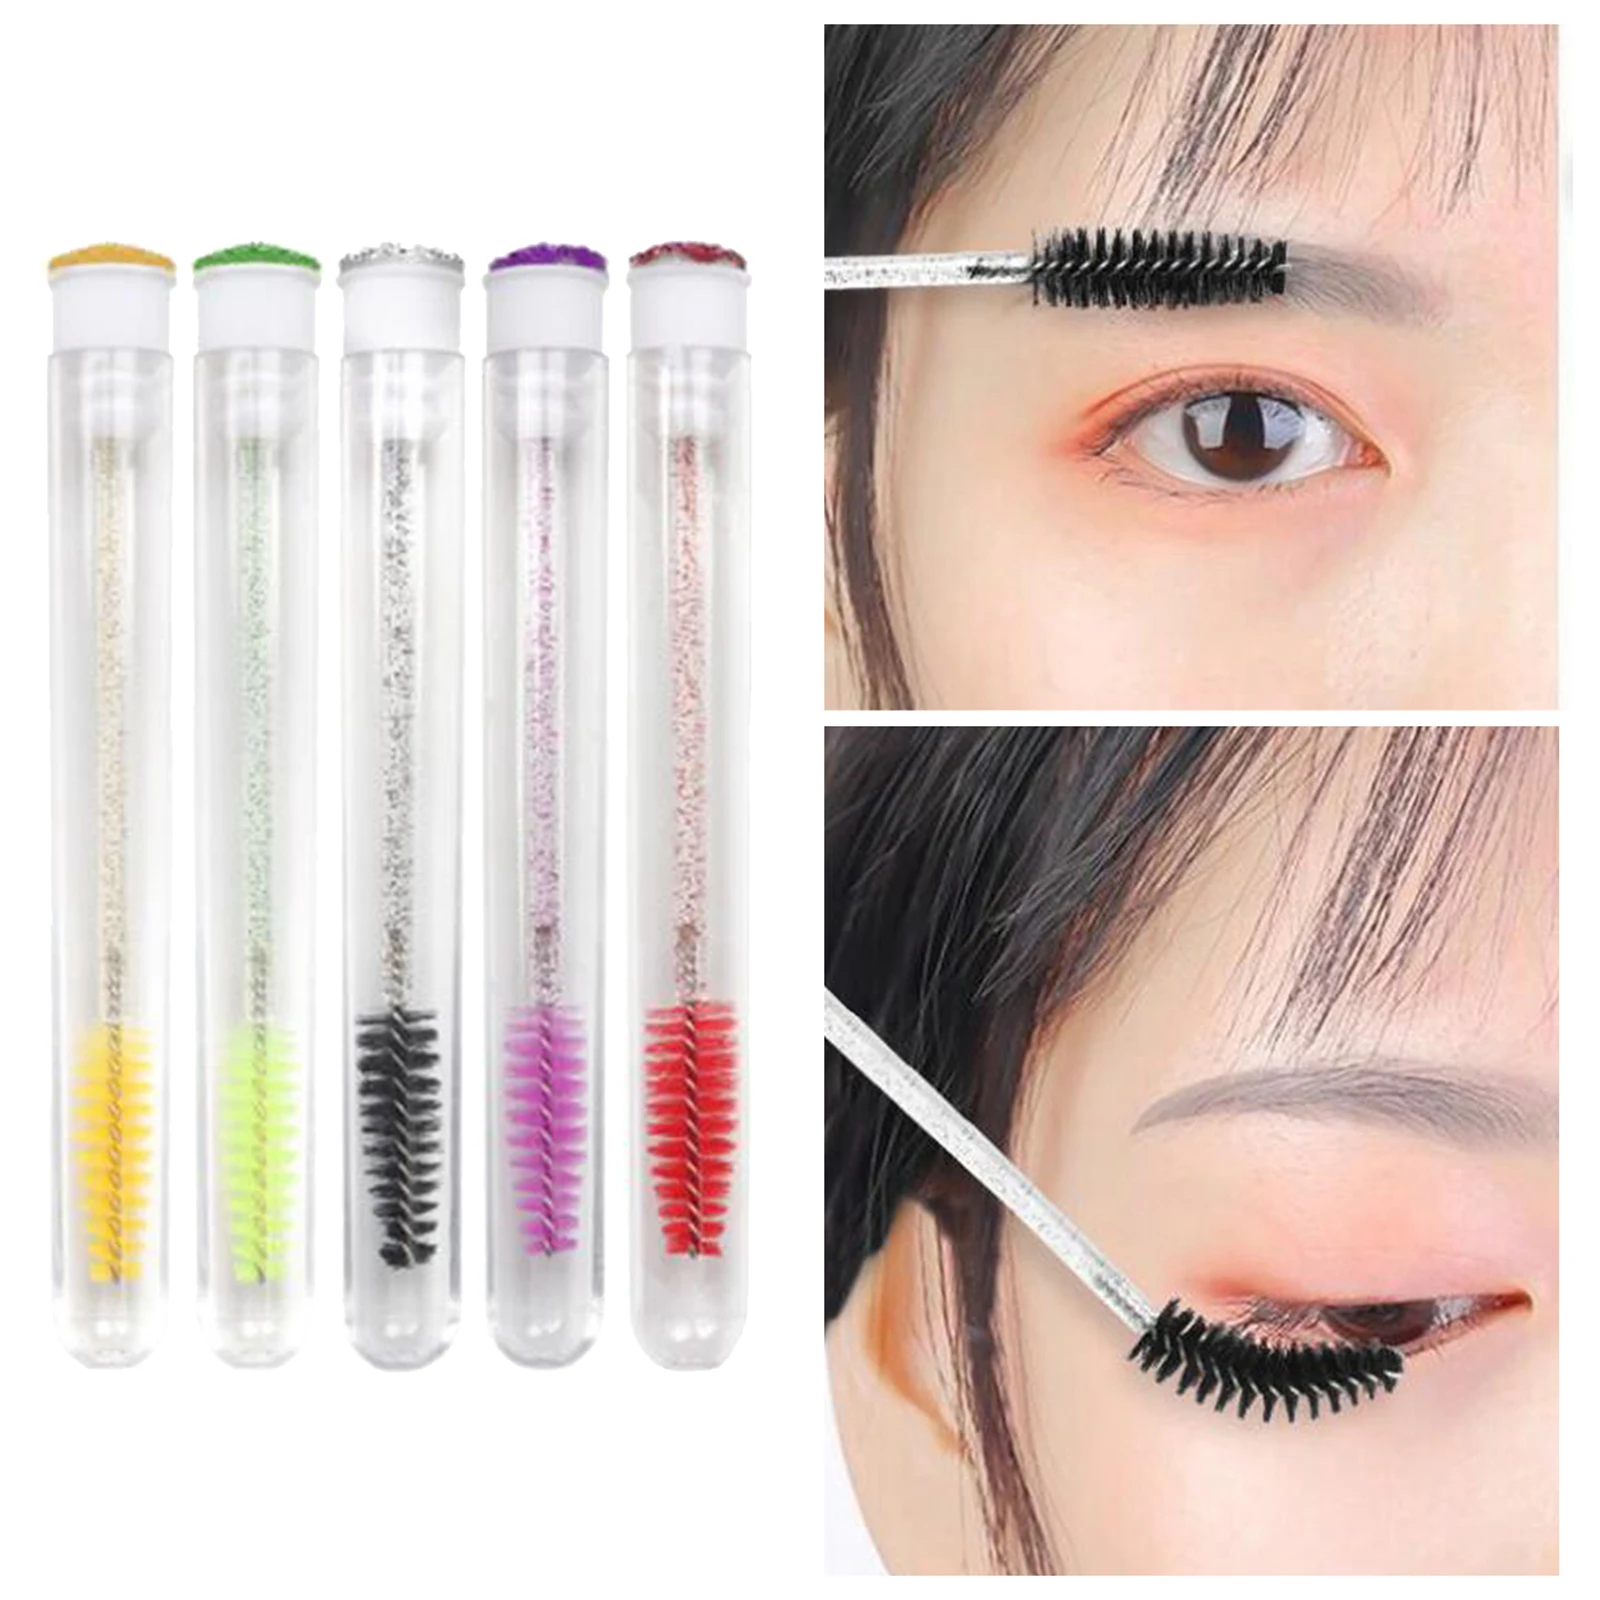 5Pcs Disposable Mascara Wand Tube Clear Eyelash Tube Eyelash Makeup Brush Tool for Eyelash Eyelash Extension Supplies For Home And Travel